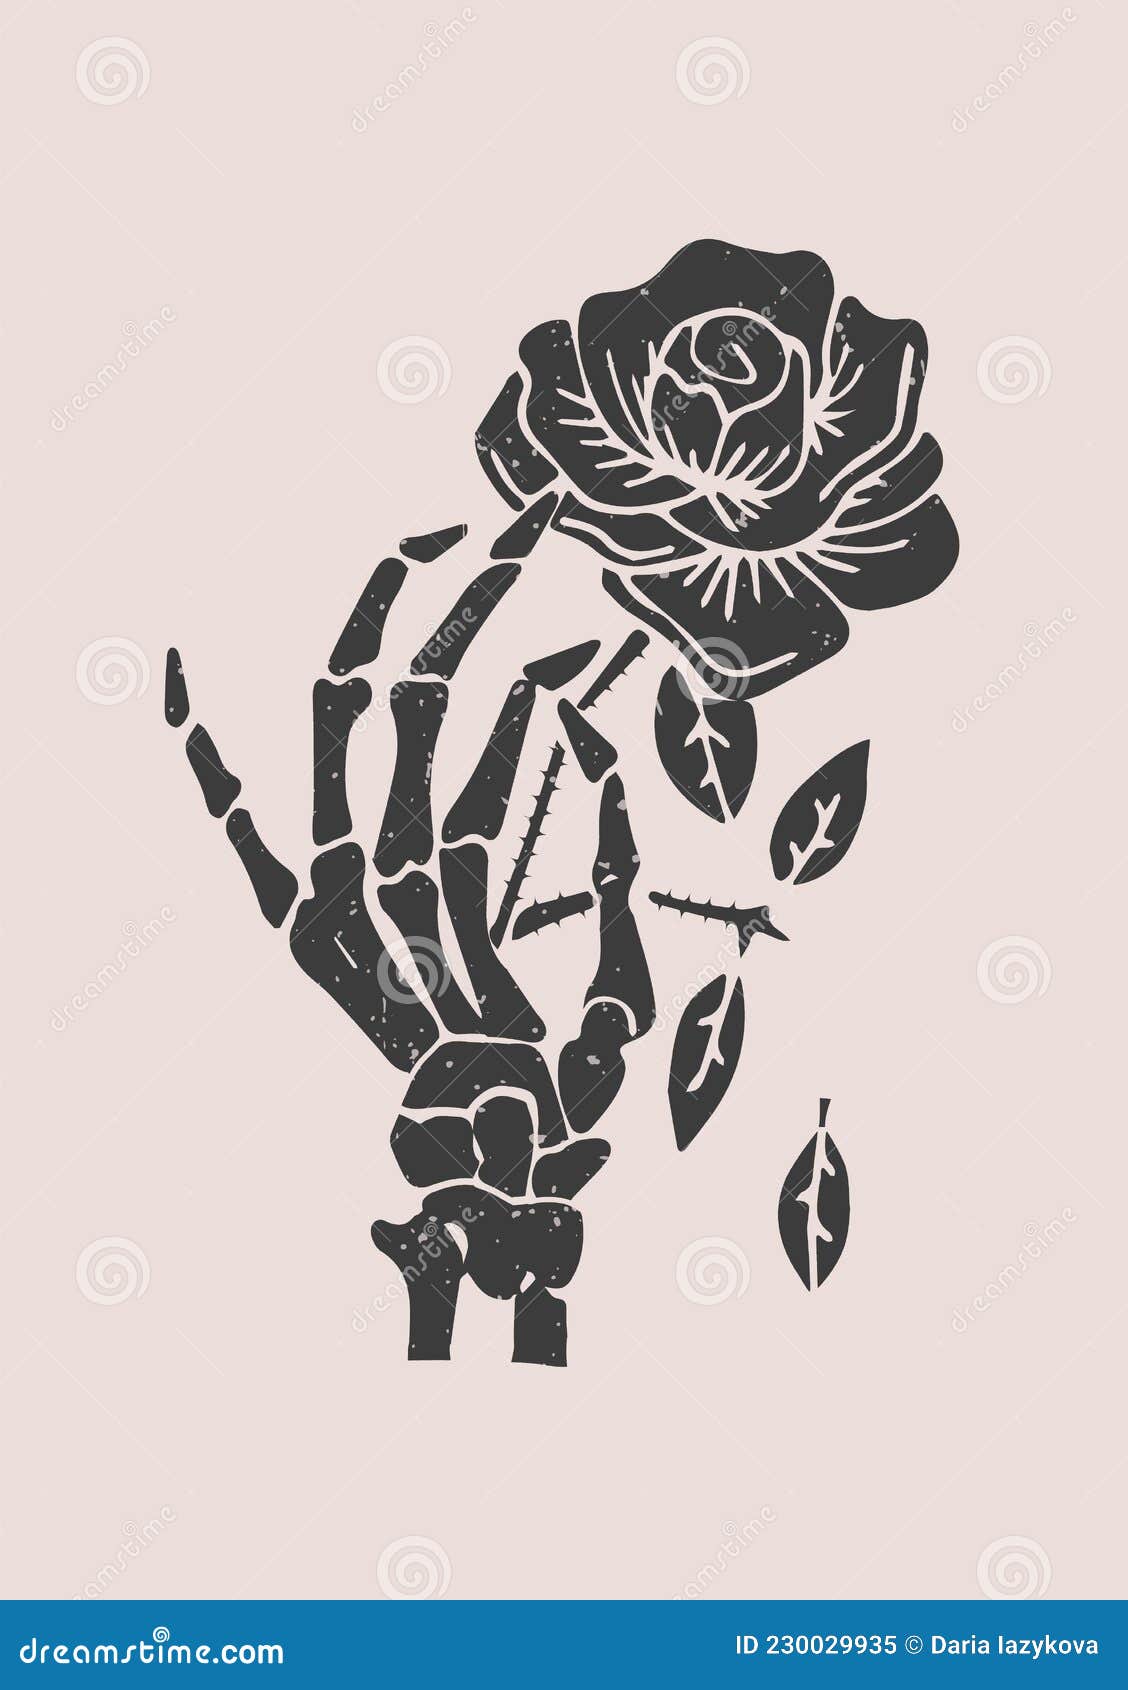 Skeleton hand holding a withering rose done by sydsmithhh  Tag someone  below that wants their hand tattoo BOOKING INFO BOOKS  Instagram